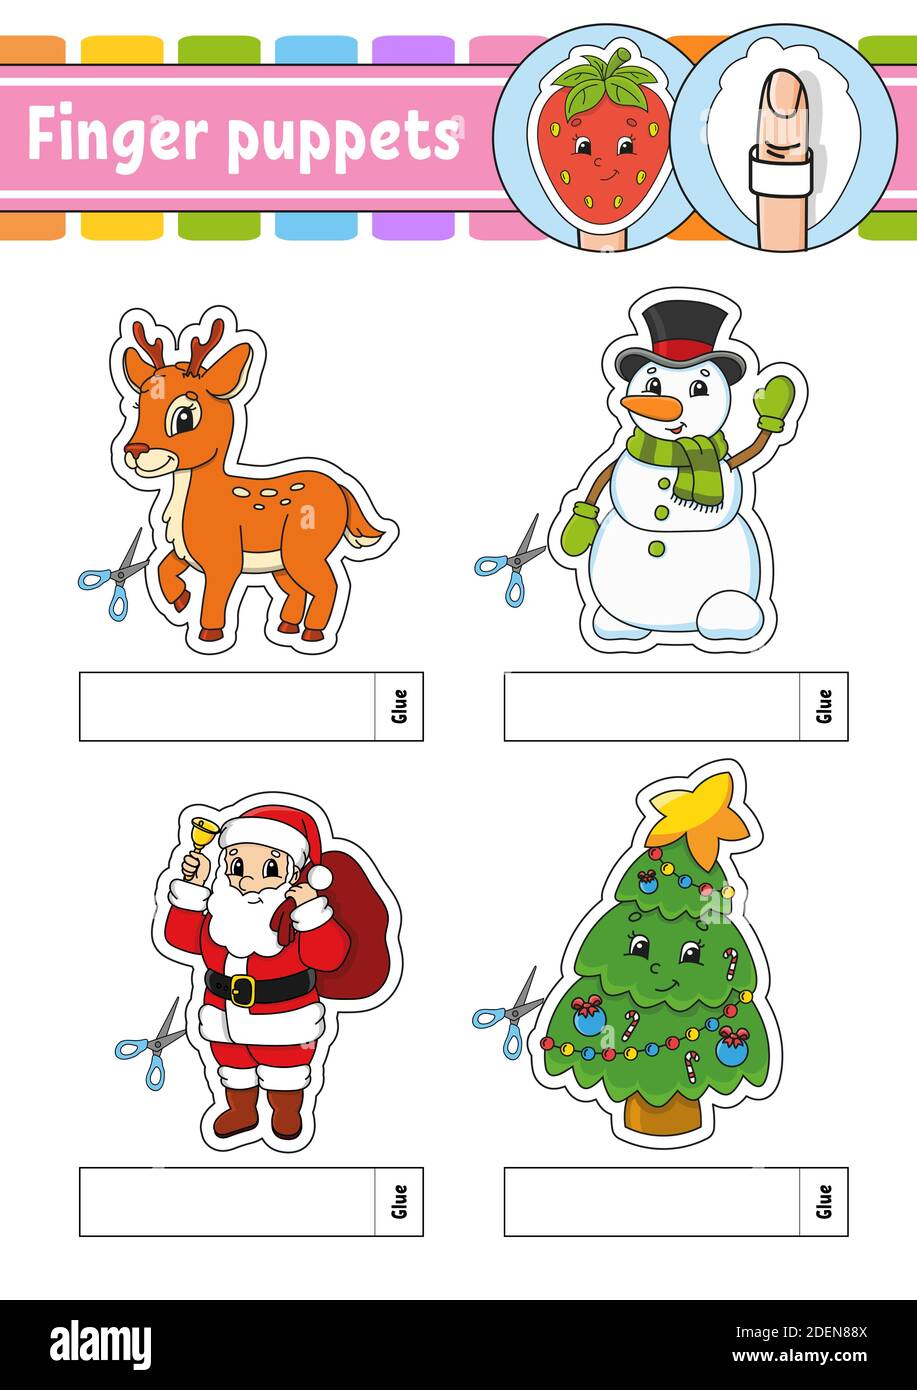 Finger puppets. Activity Game for kids. Cute characters. Cartoon style. Christmas theme. Color vector illustration. Stock Vector